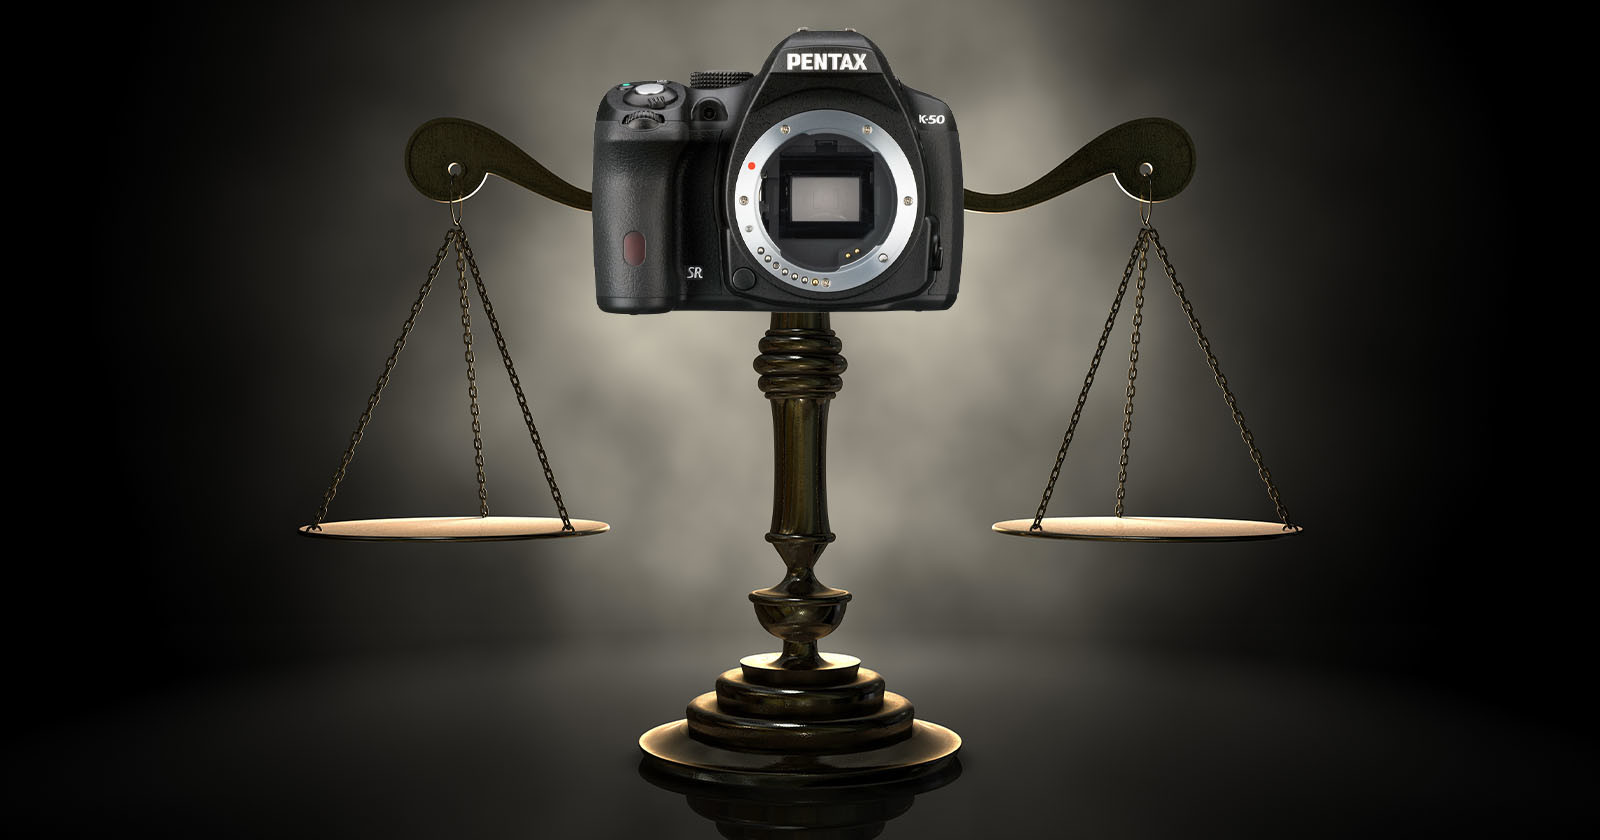 Judge Throws Out Lawsuit That Claimed the Pentax K-50 Was Flawed